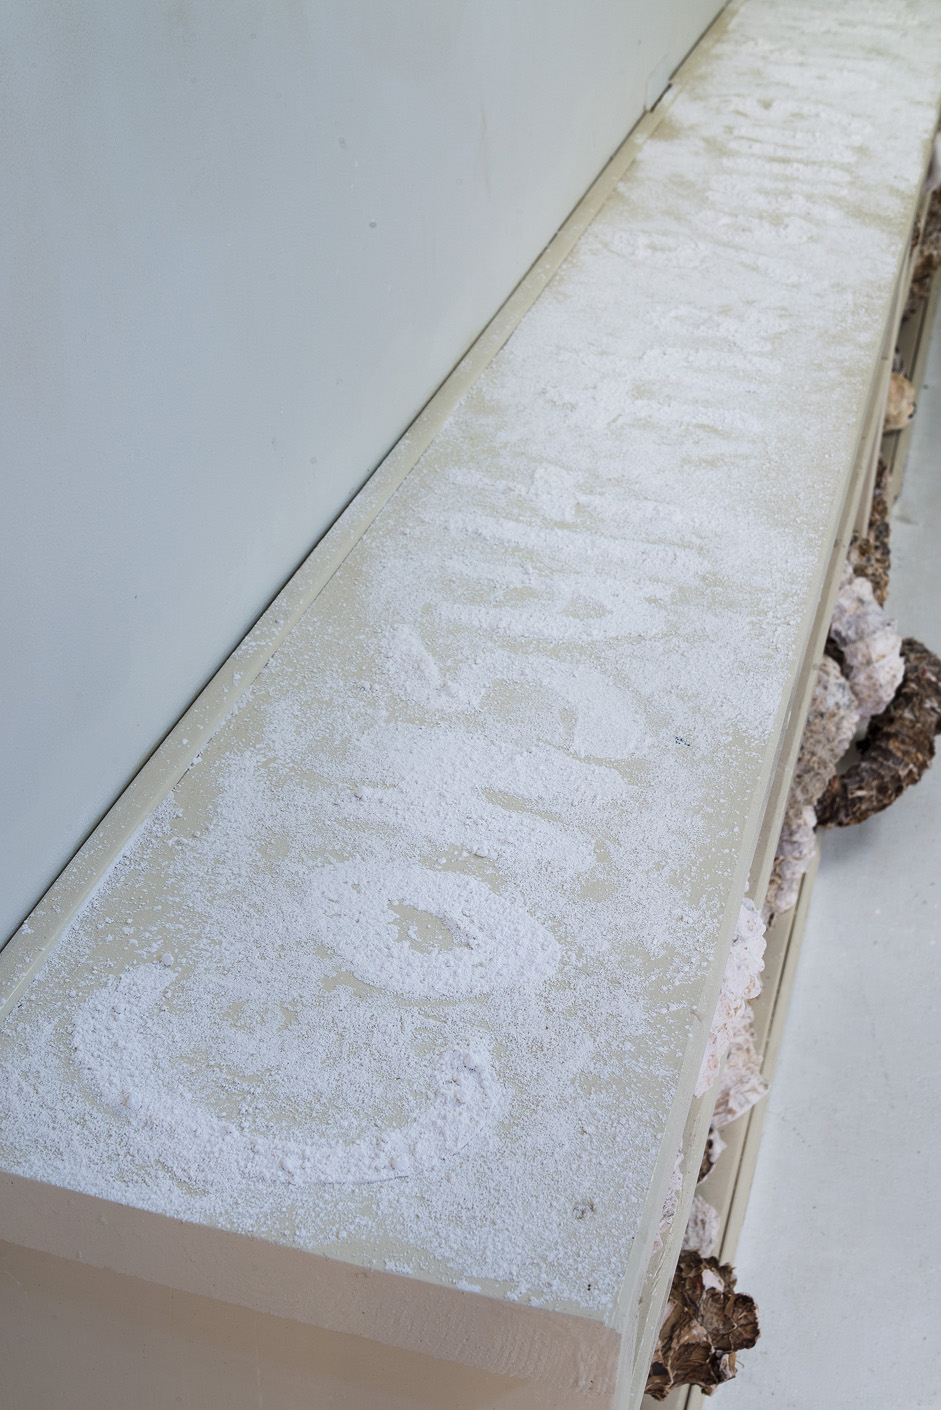  Installation detail of bookcase surface, text from Wes Jackson stenciled in powdered plaster “Consult the genius of the place . . . nature as measure” 